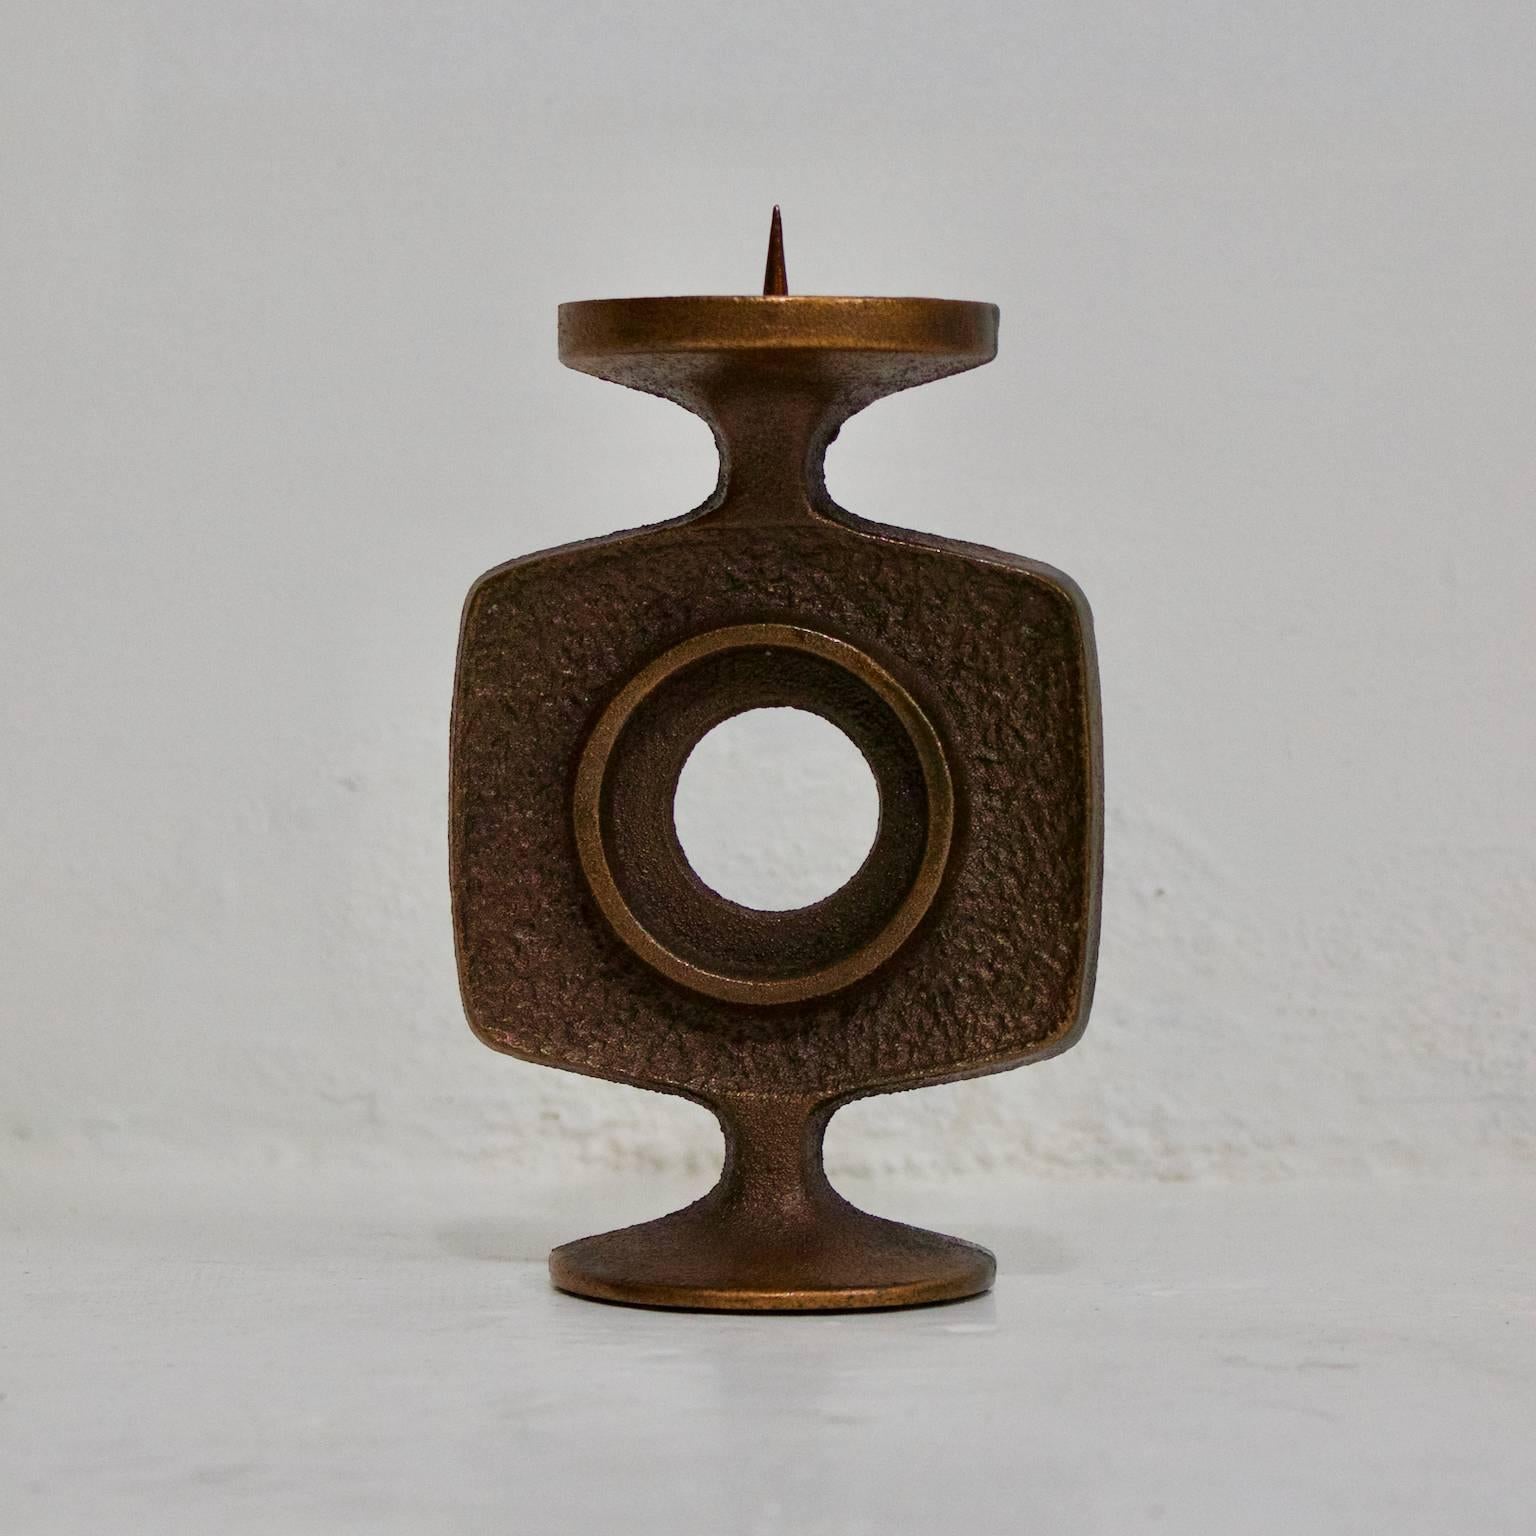 Small Brutalist candlestick, Germany, 1960s.

A stylish piece - alloy finished in brass or bronze - probably sand-cast, with a textured finish and a felt base. Very good original condition.